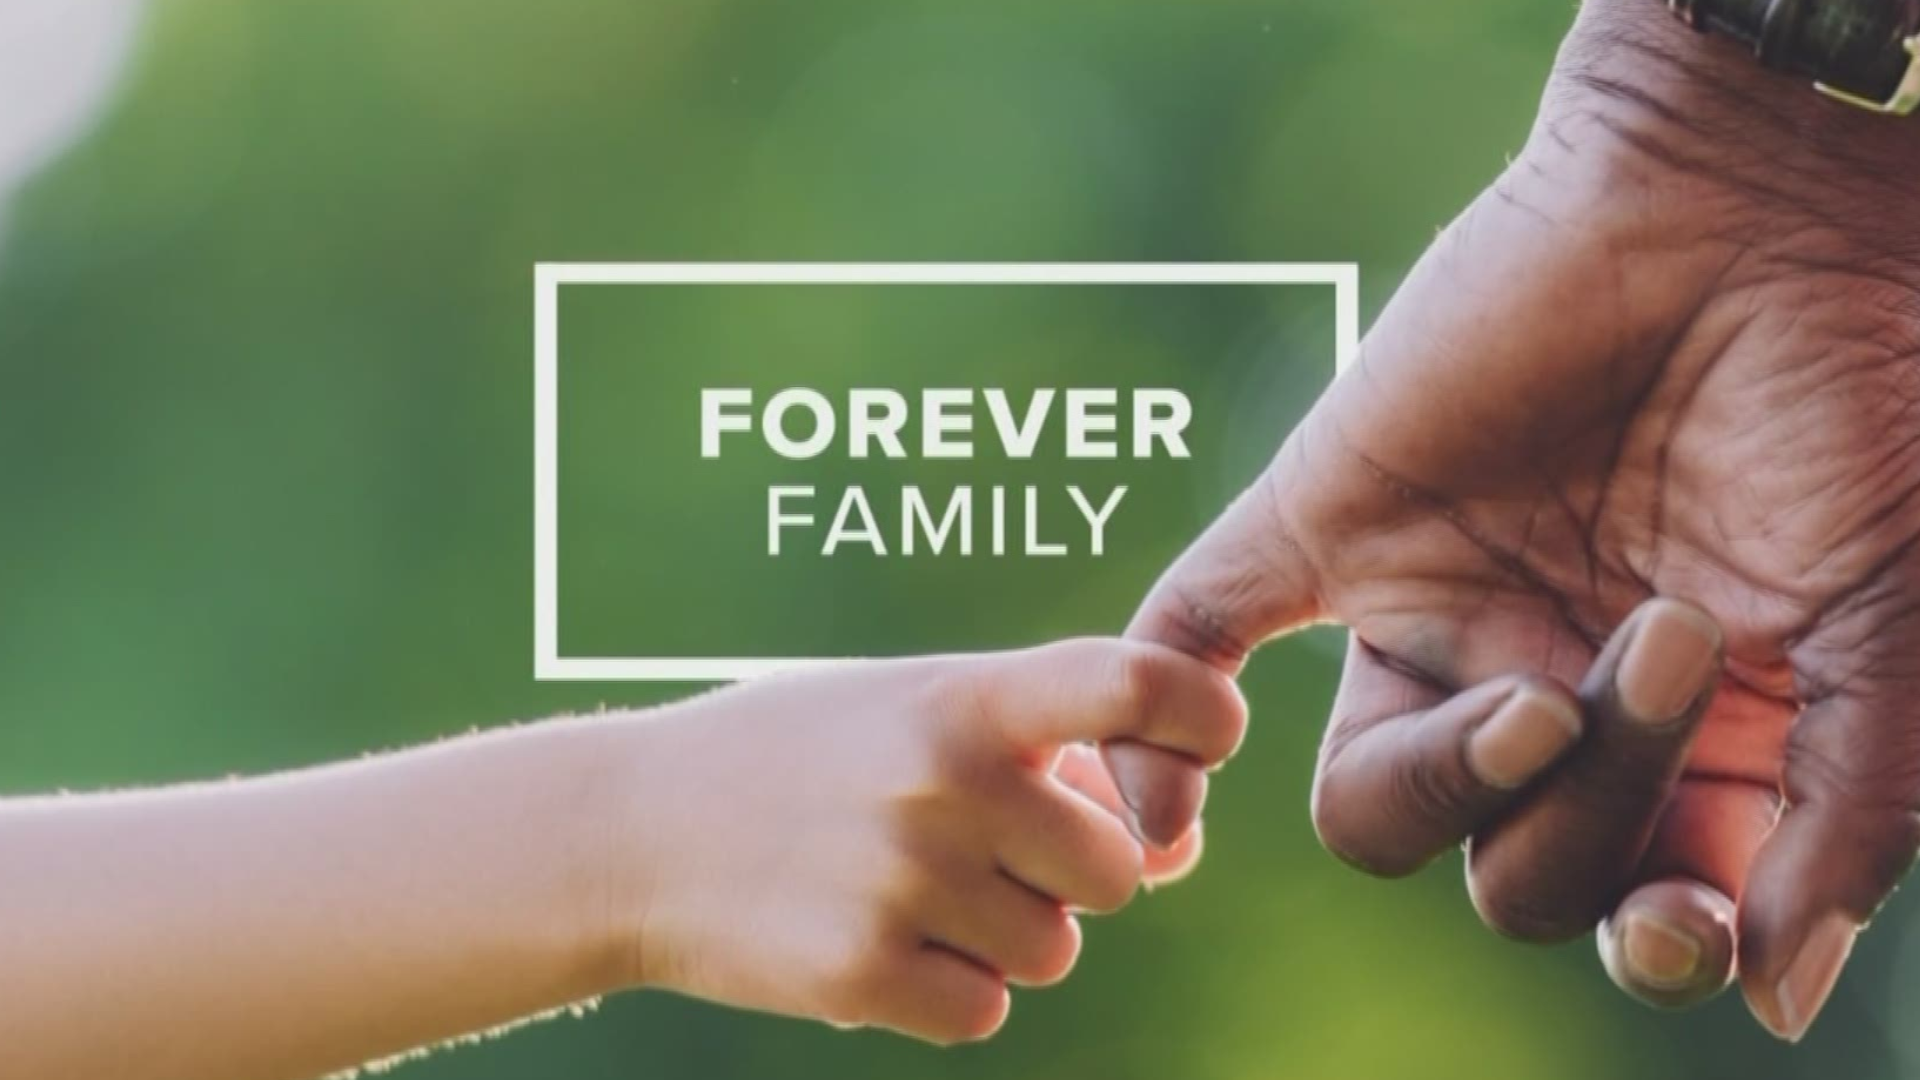 Forever Family segment celebrates one year anniversary. Catch 'Forever Family' every Saturday night on Kens 5 Eyewitness News.